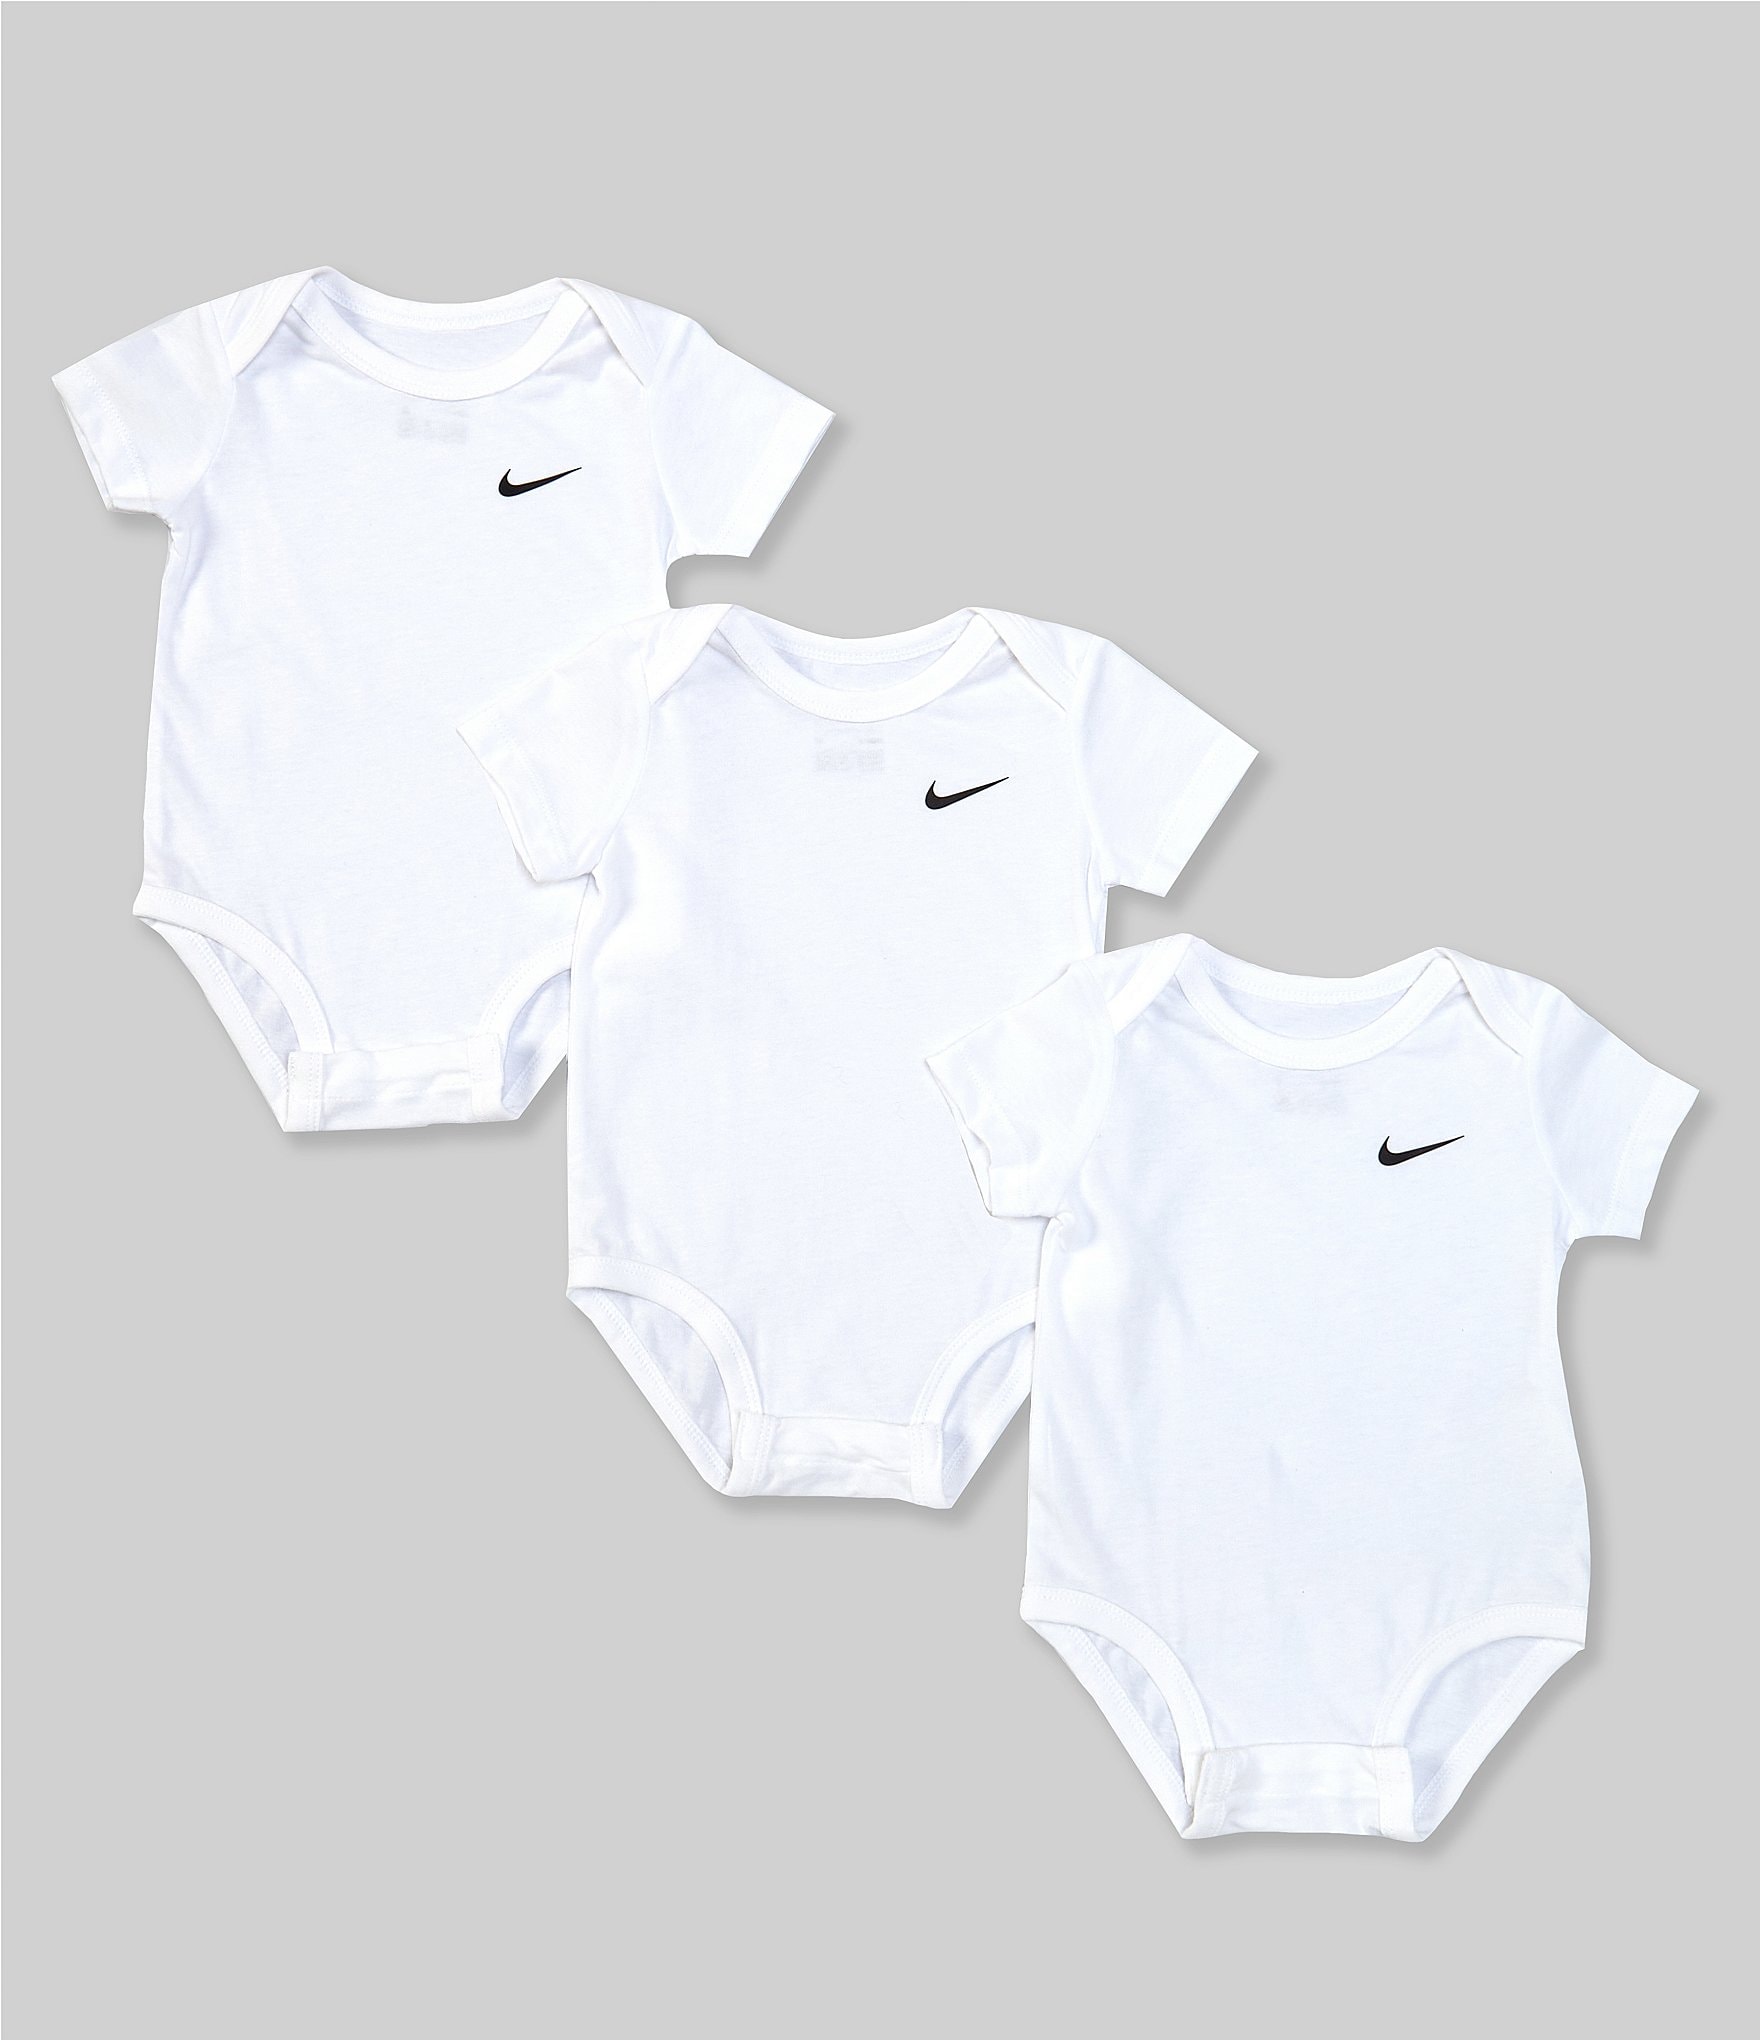 Nike Baby Girl Clothes 0-24 Months | Dillard's